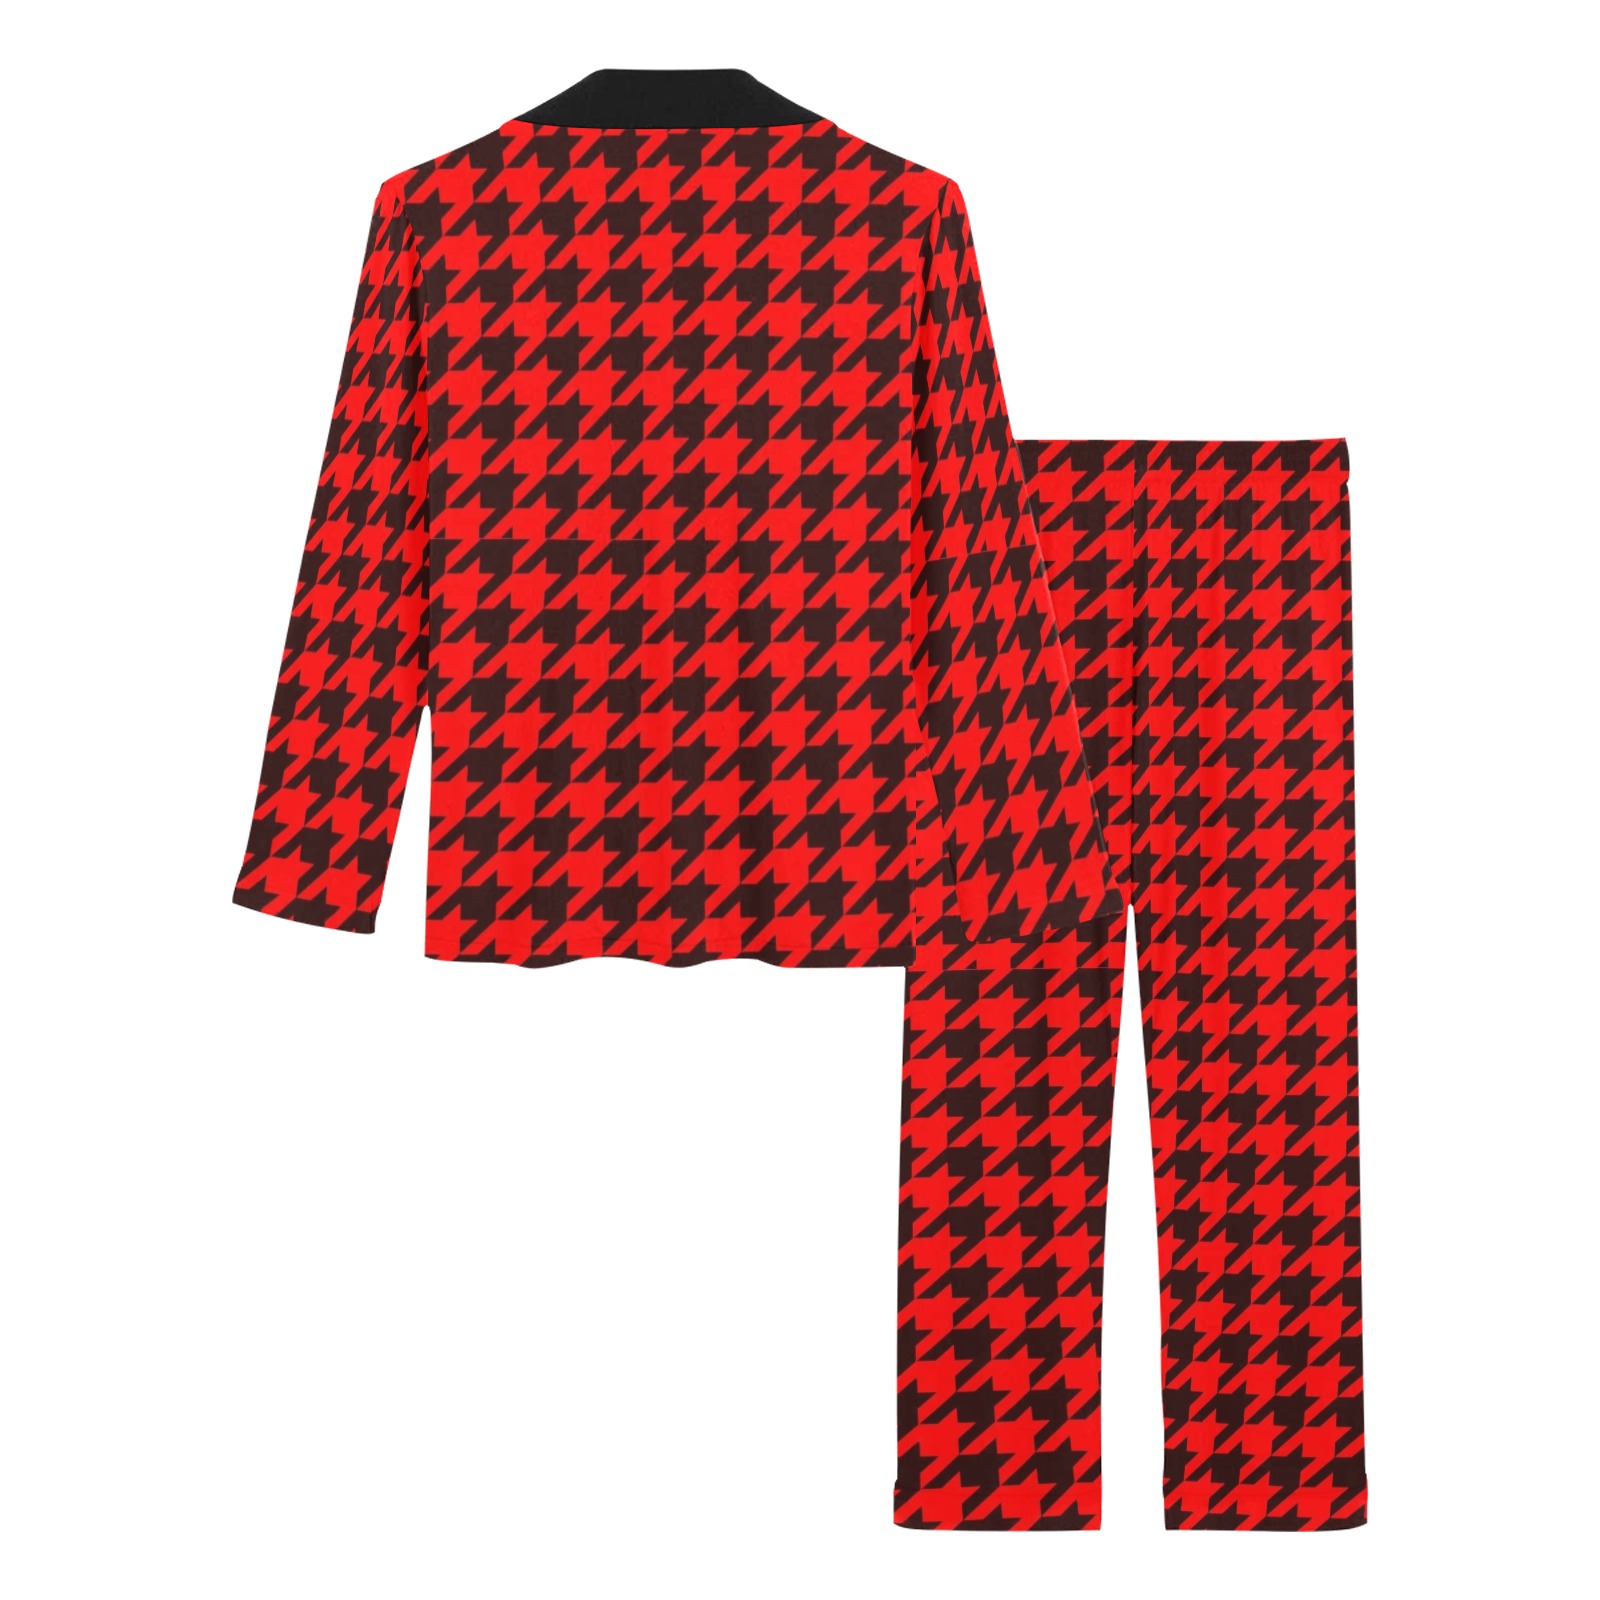 Black and Red Tight Houndstooth Pattern Women's Long Pajama Set